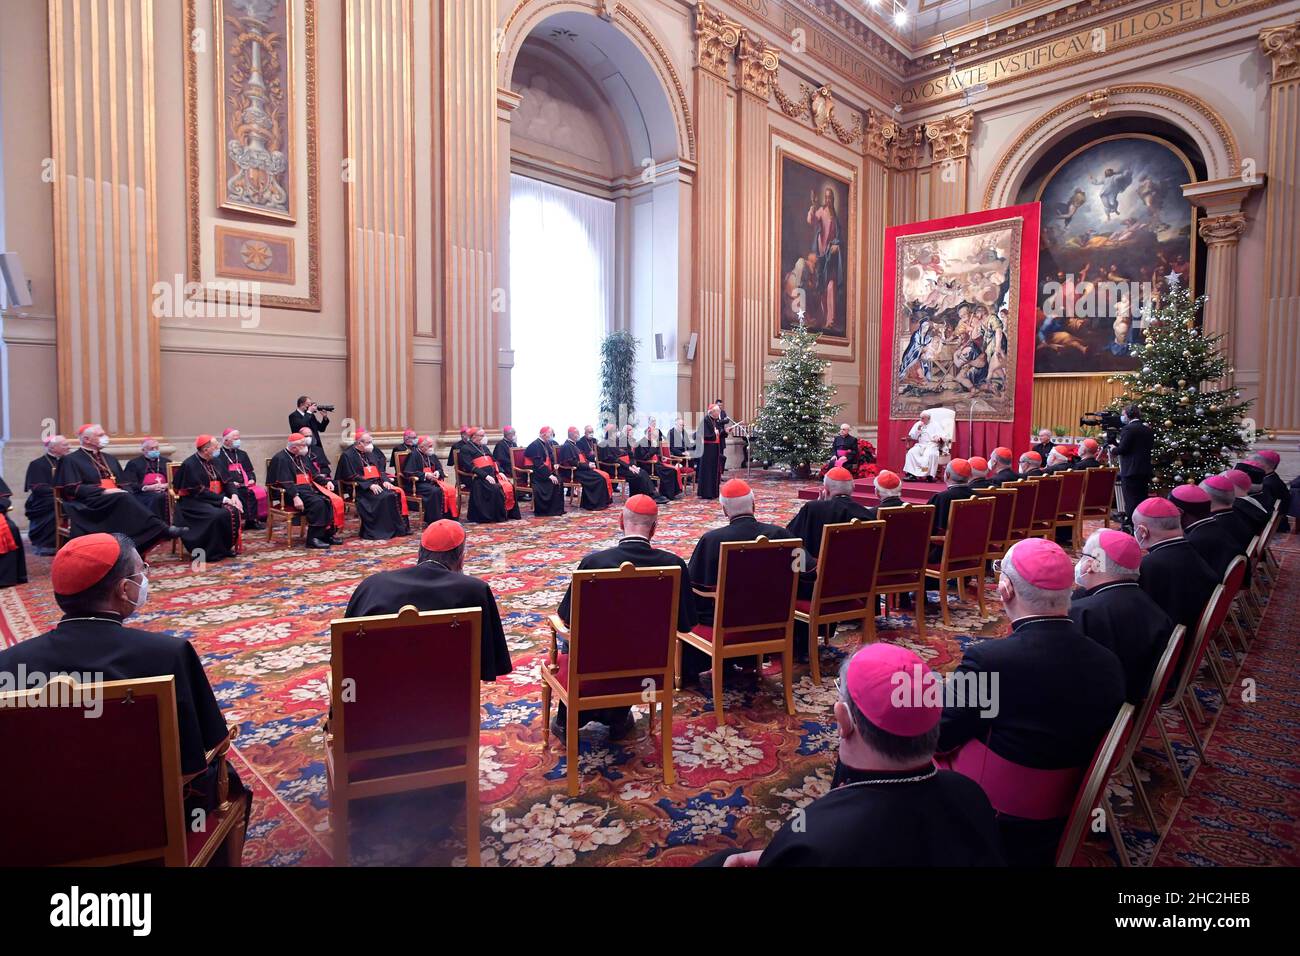 Vatican City, Italy. 23rd Dec, 2021. Pope Francis attending an audience for the annual exchange of Christmas greetings with the members of the Roman Curia in the Vatican.on December 23, 2021 RESTRICTED TO EDITORIAL USE - Vatican Media/Spaziani. Credit: dpa/Alamy Live News Stock Photo